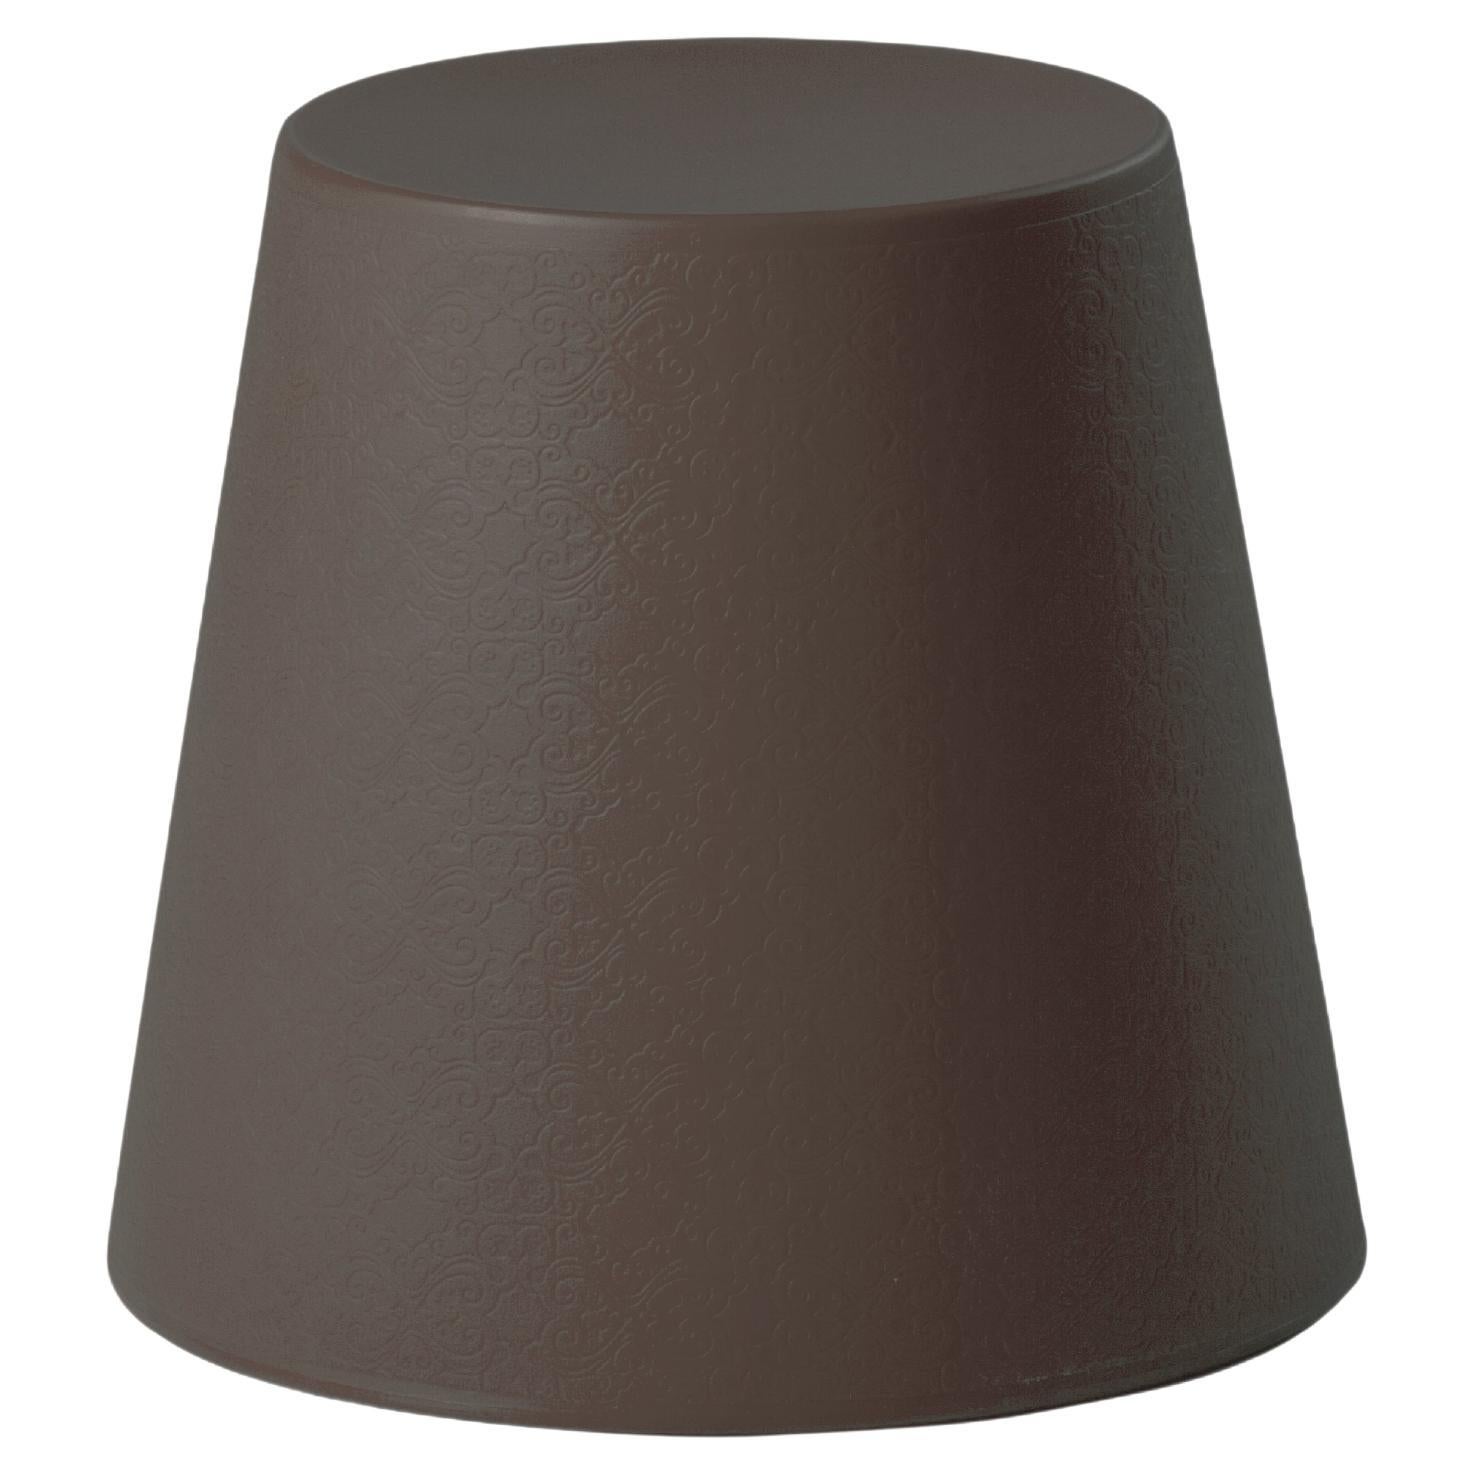 Slide Design Ali Baba Stool in Chocolate Brown by Giò Colonna Romano For Sale